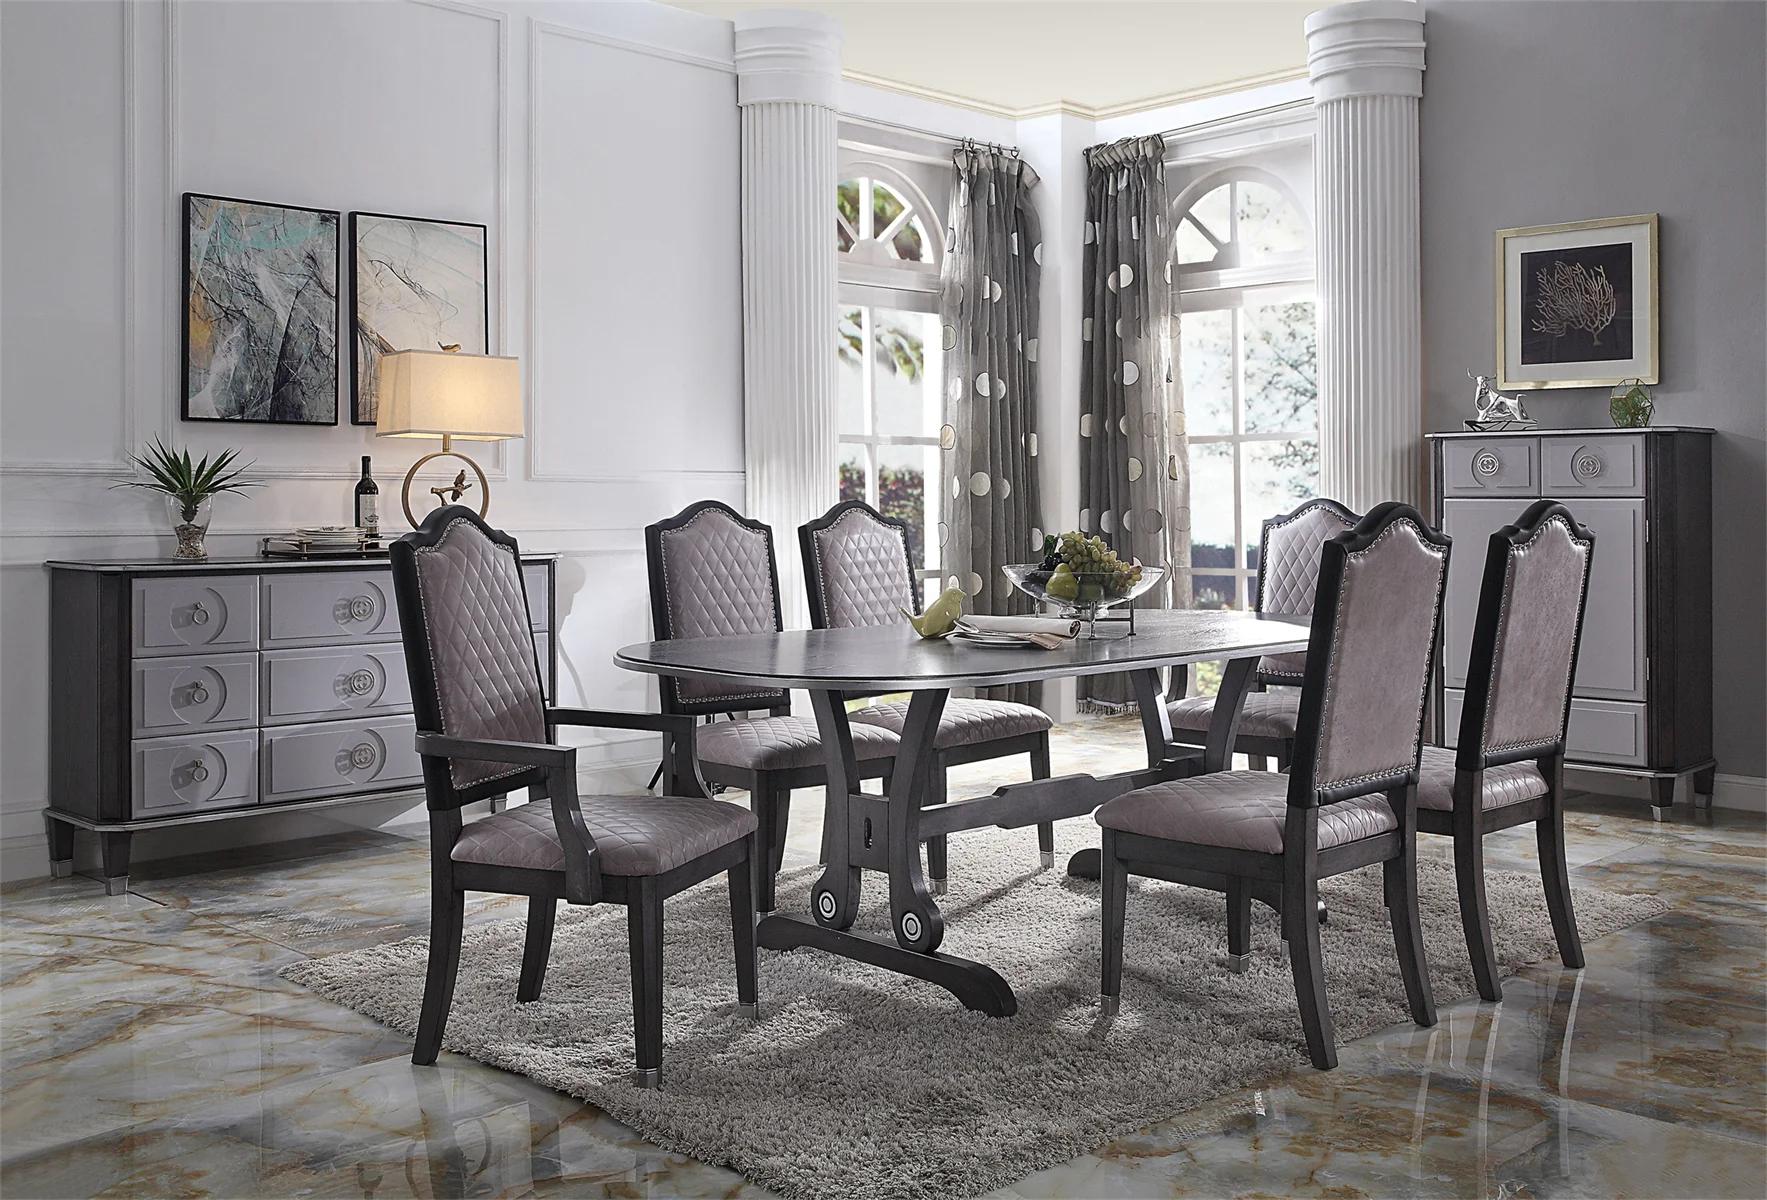 Transitional Dining Room Set House Beatrice 68810-11pcs in Charcoal Fabric